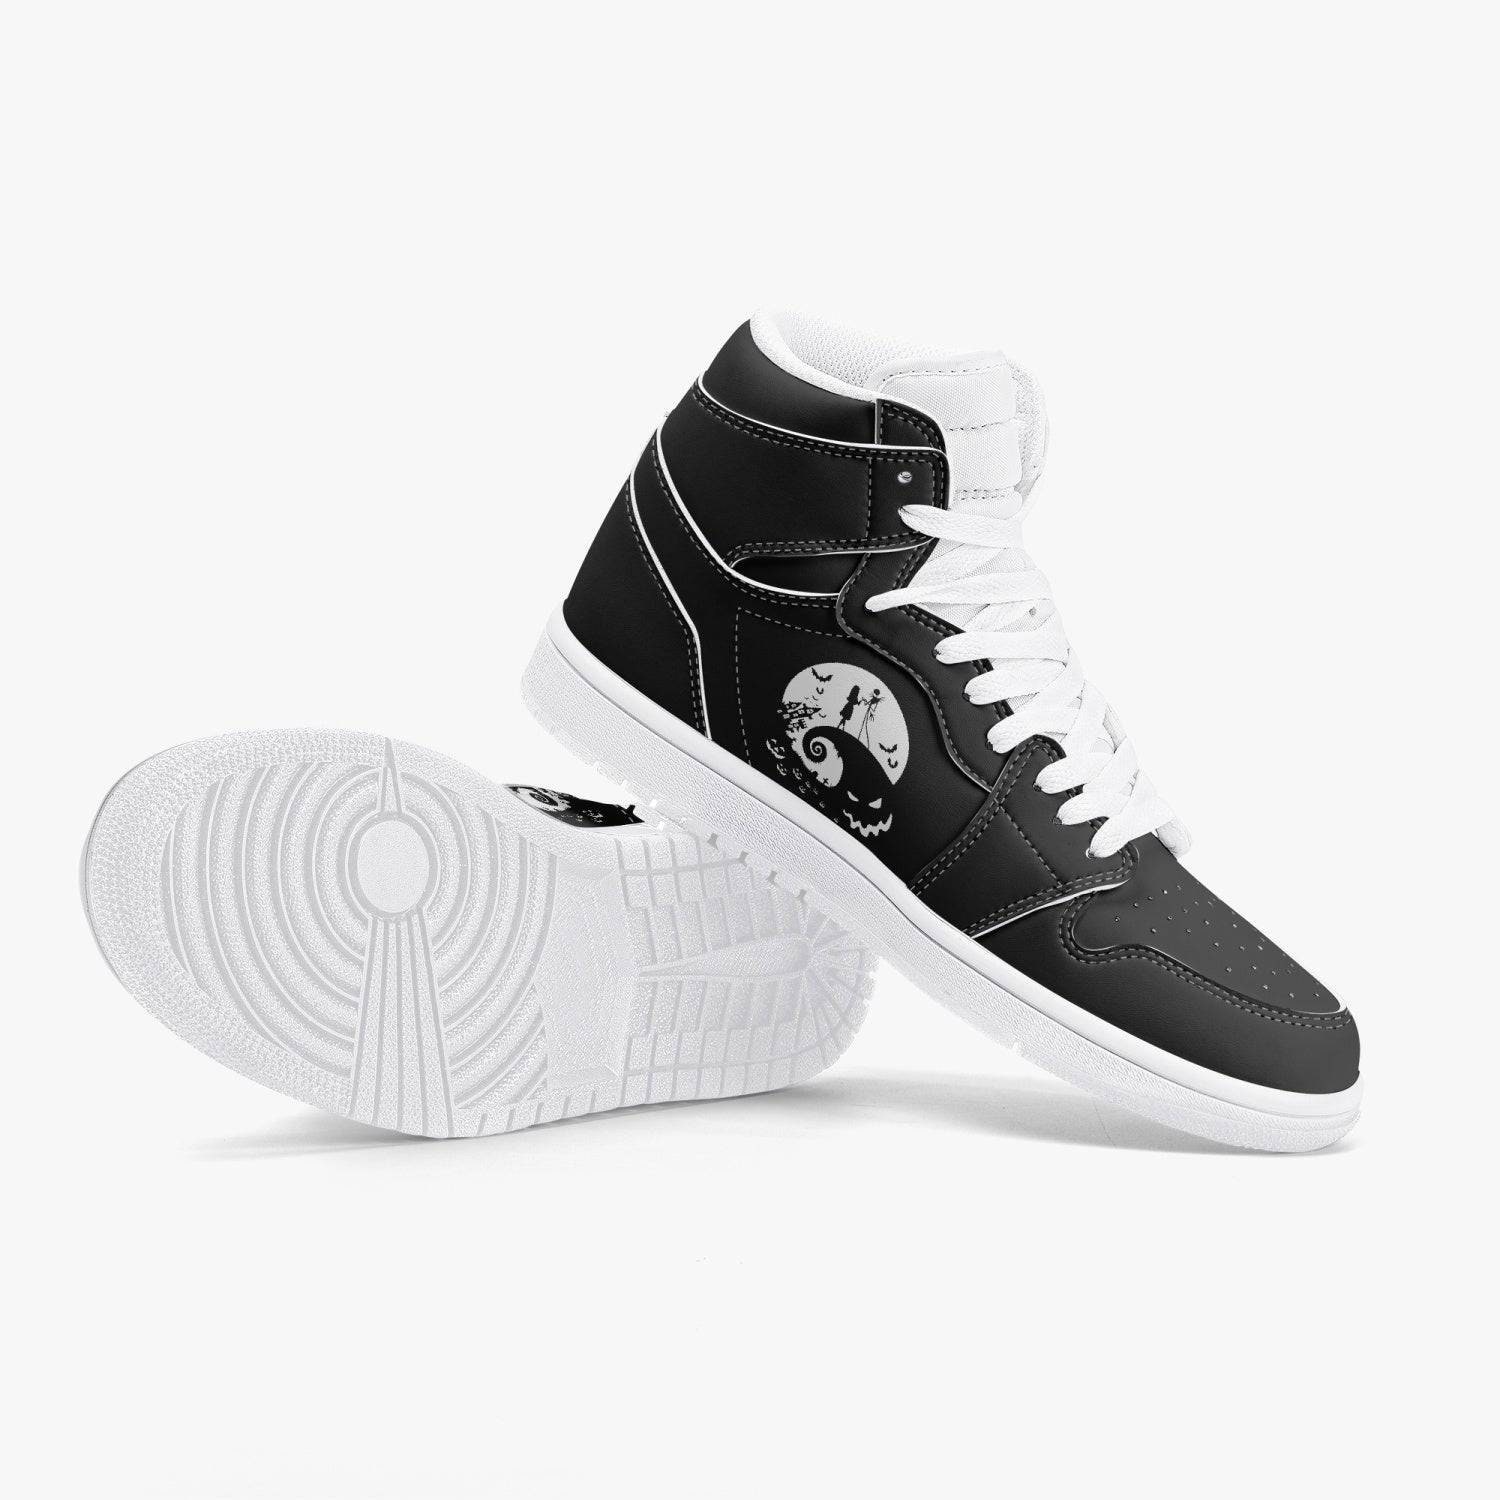 Women's Nightmare Before Christmas High-Top Leather Sneakers